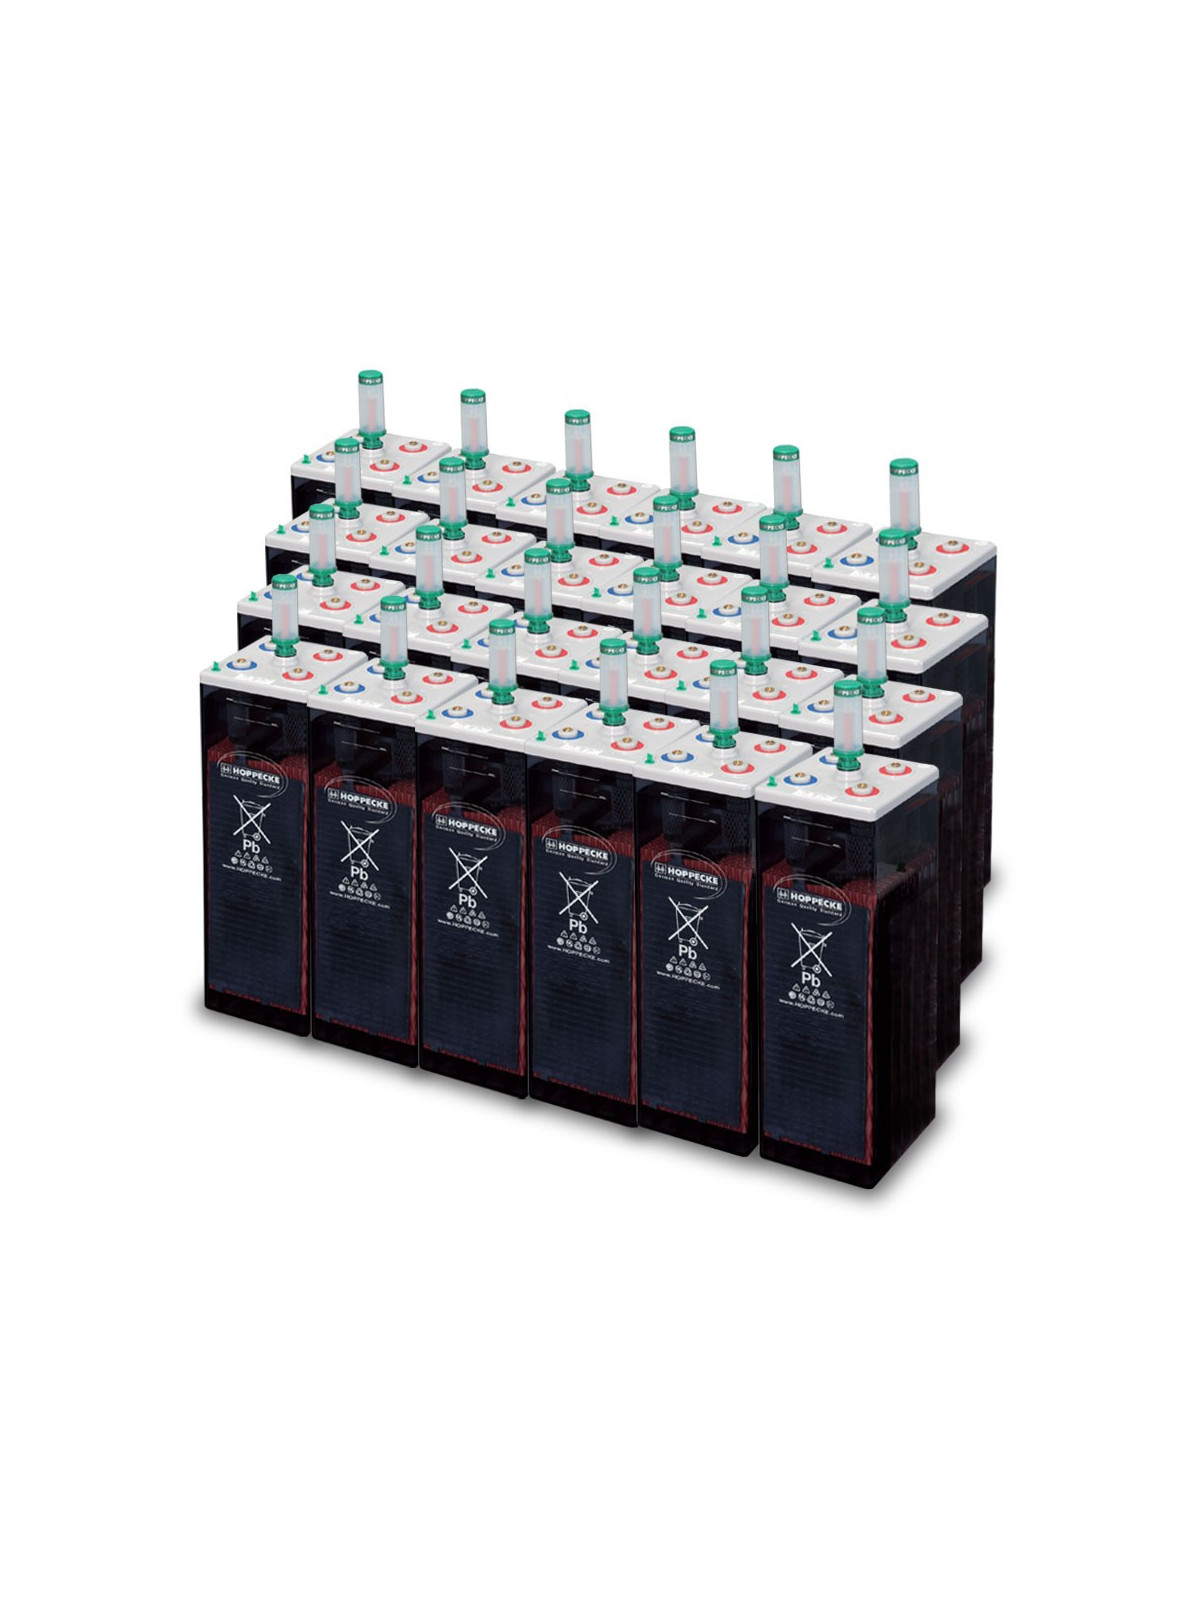 104 kWh OPzS 48V battery pack